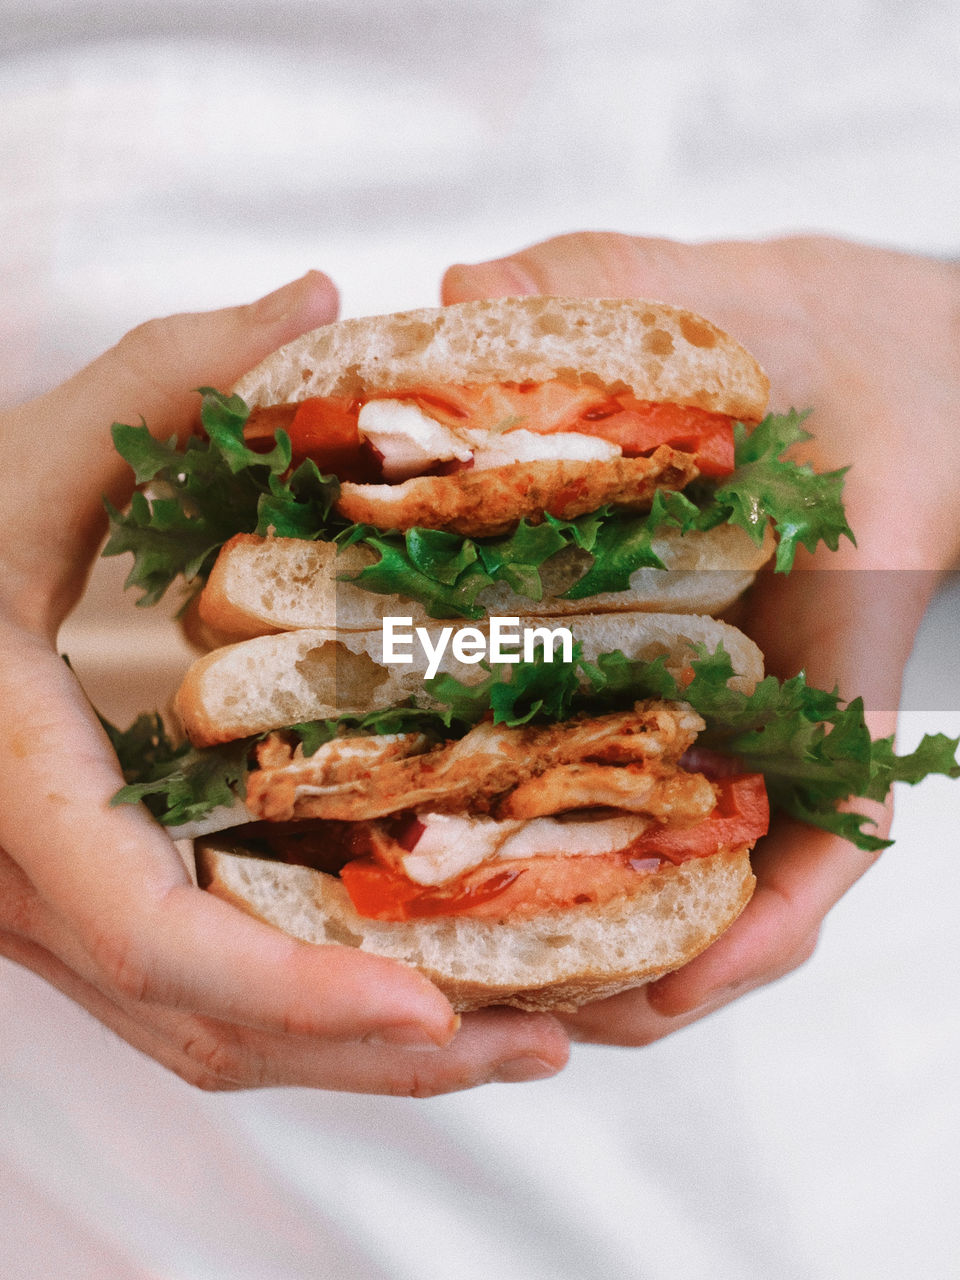 CLOSE-UP OF HAND HOLDING SANDWICH